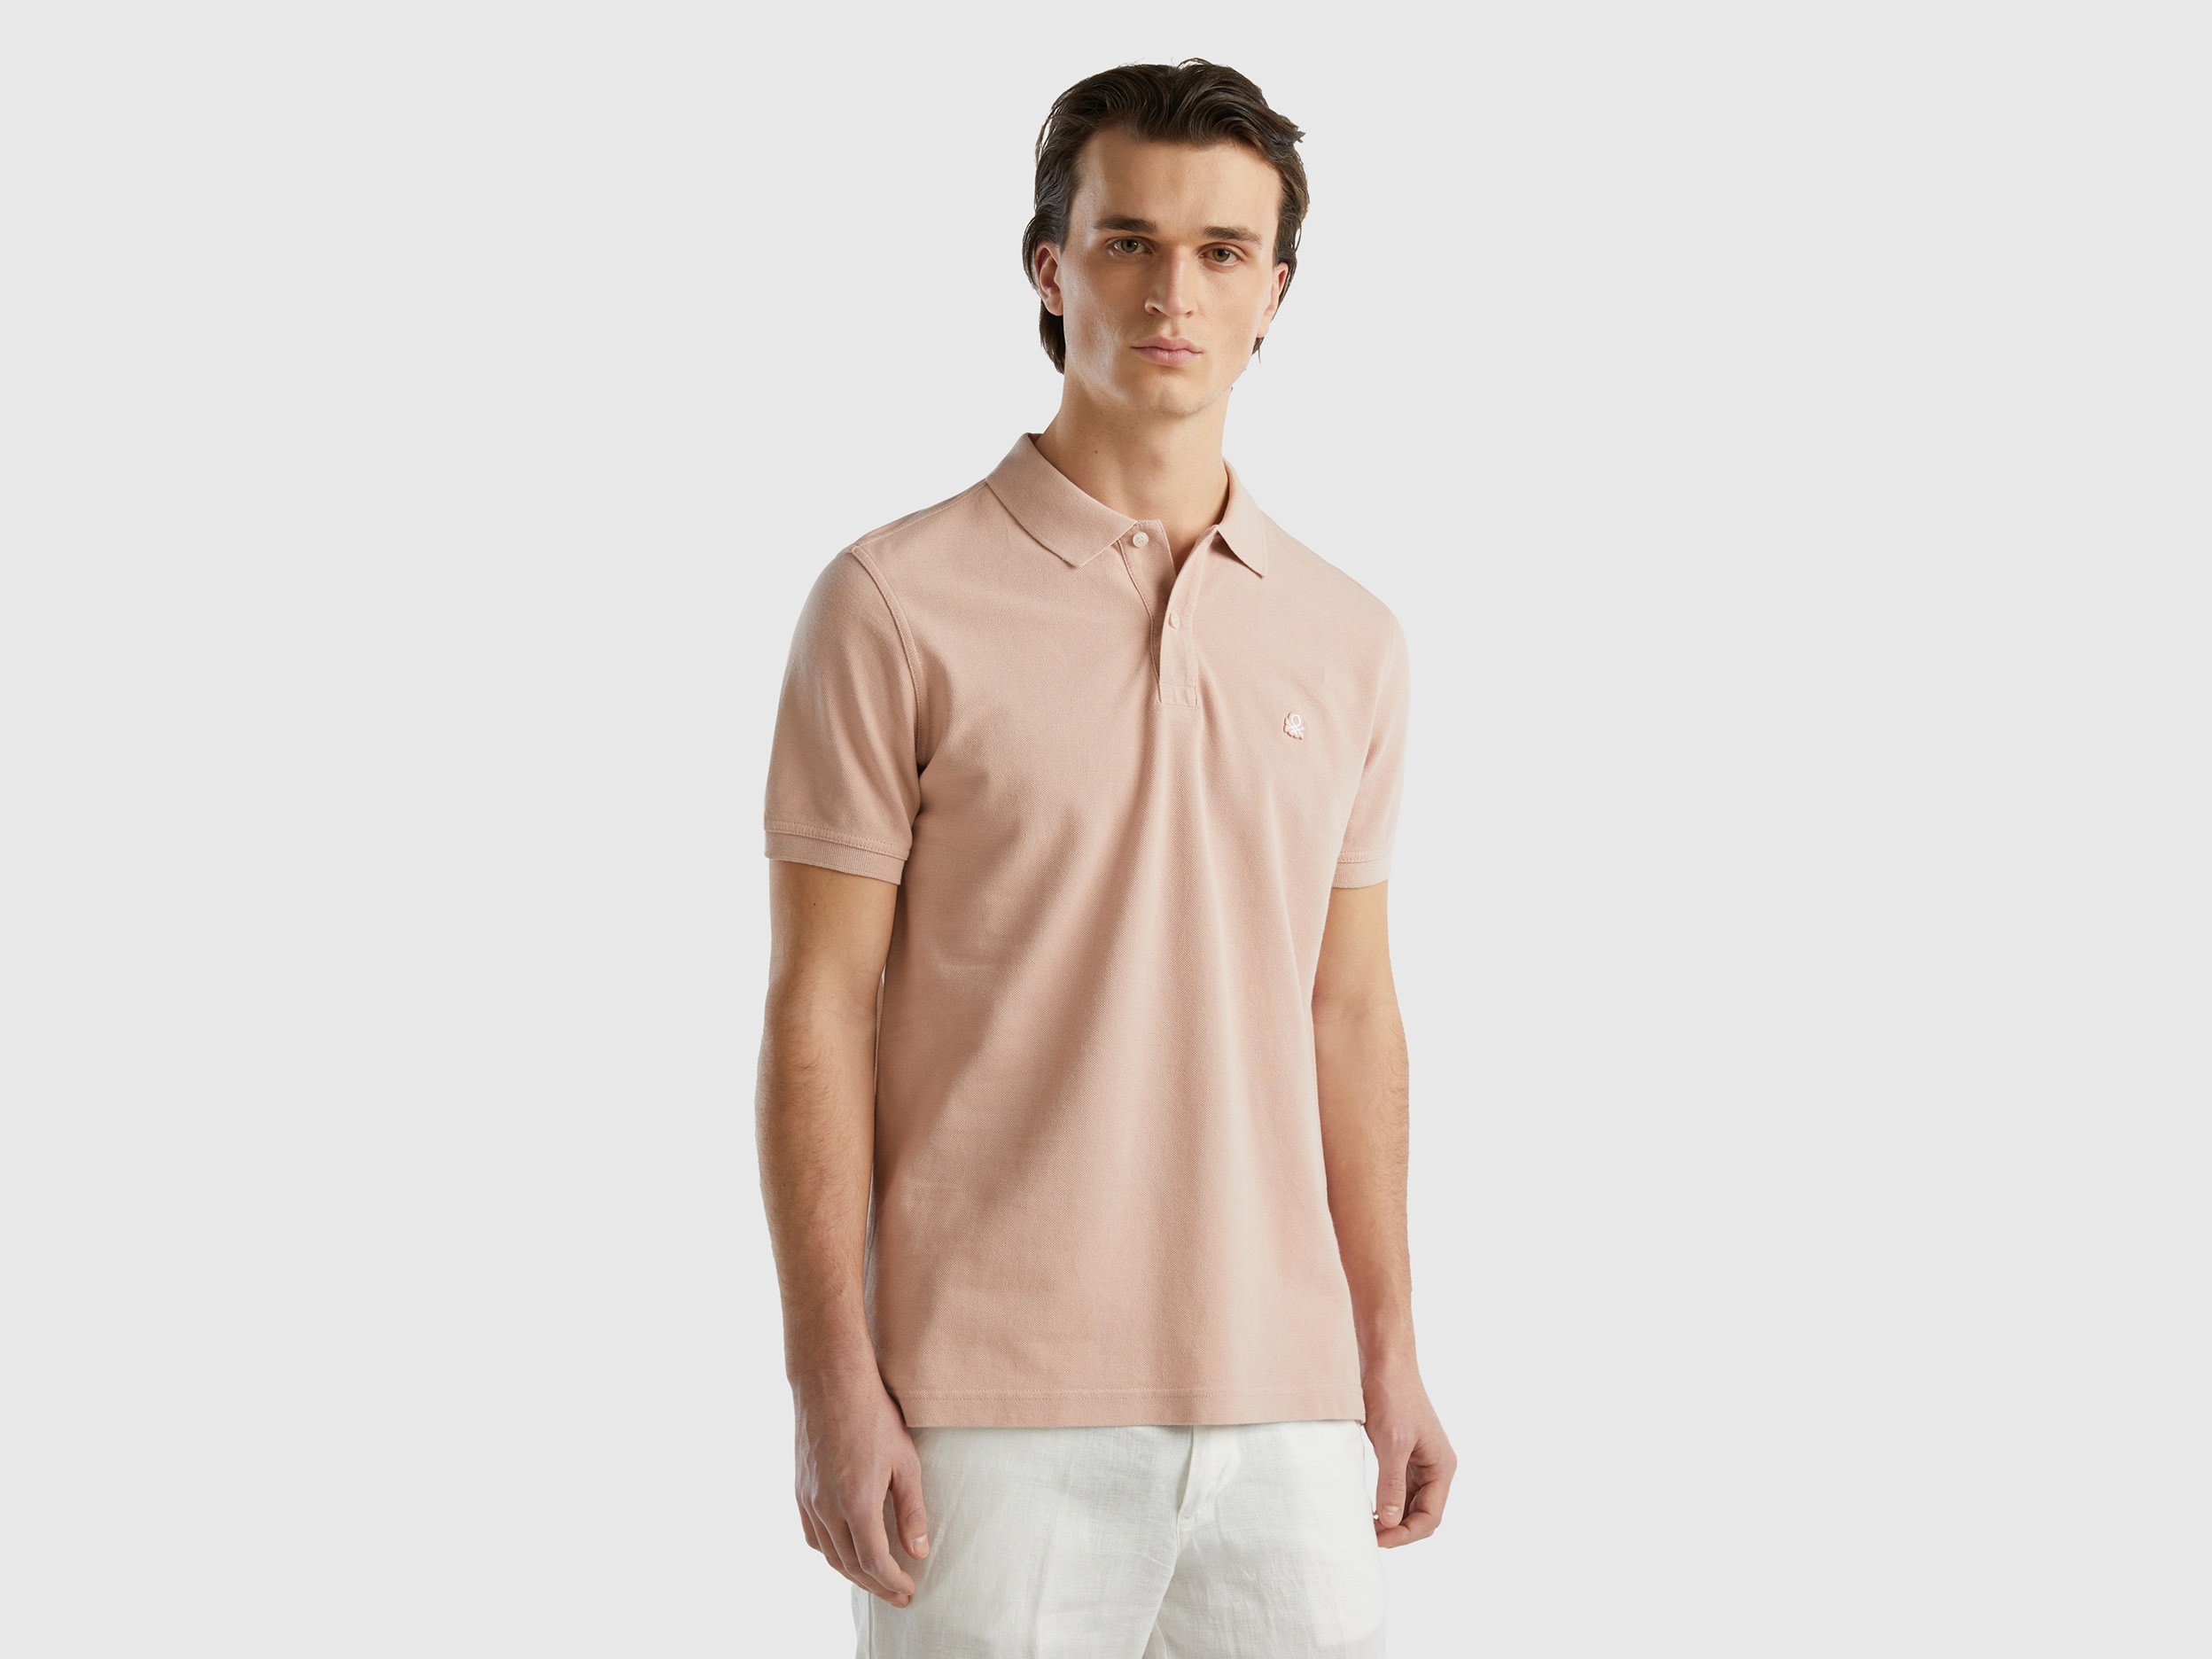 Benetton, Pink Regular Fit Polo, size L, Nude, Men